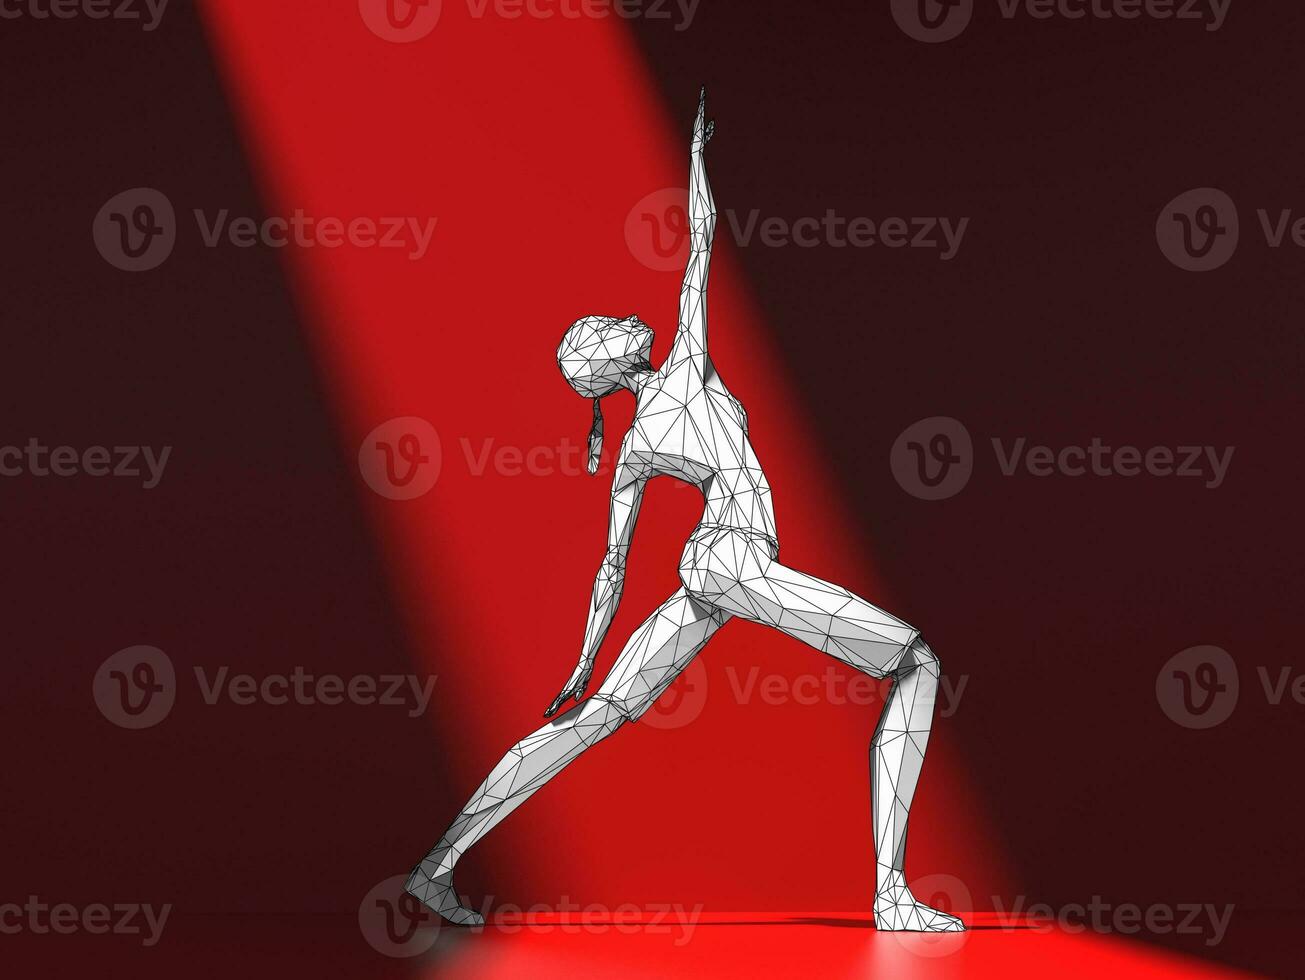 Yoga pose - low polygon girl stands in a yoga pose under a ray of light - back view photo